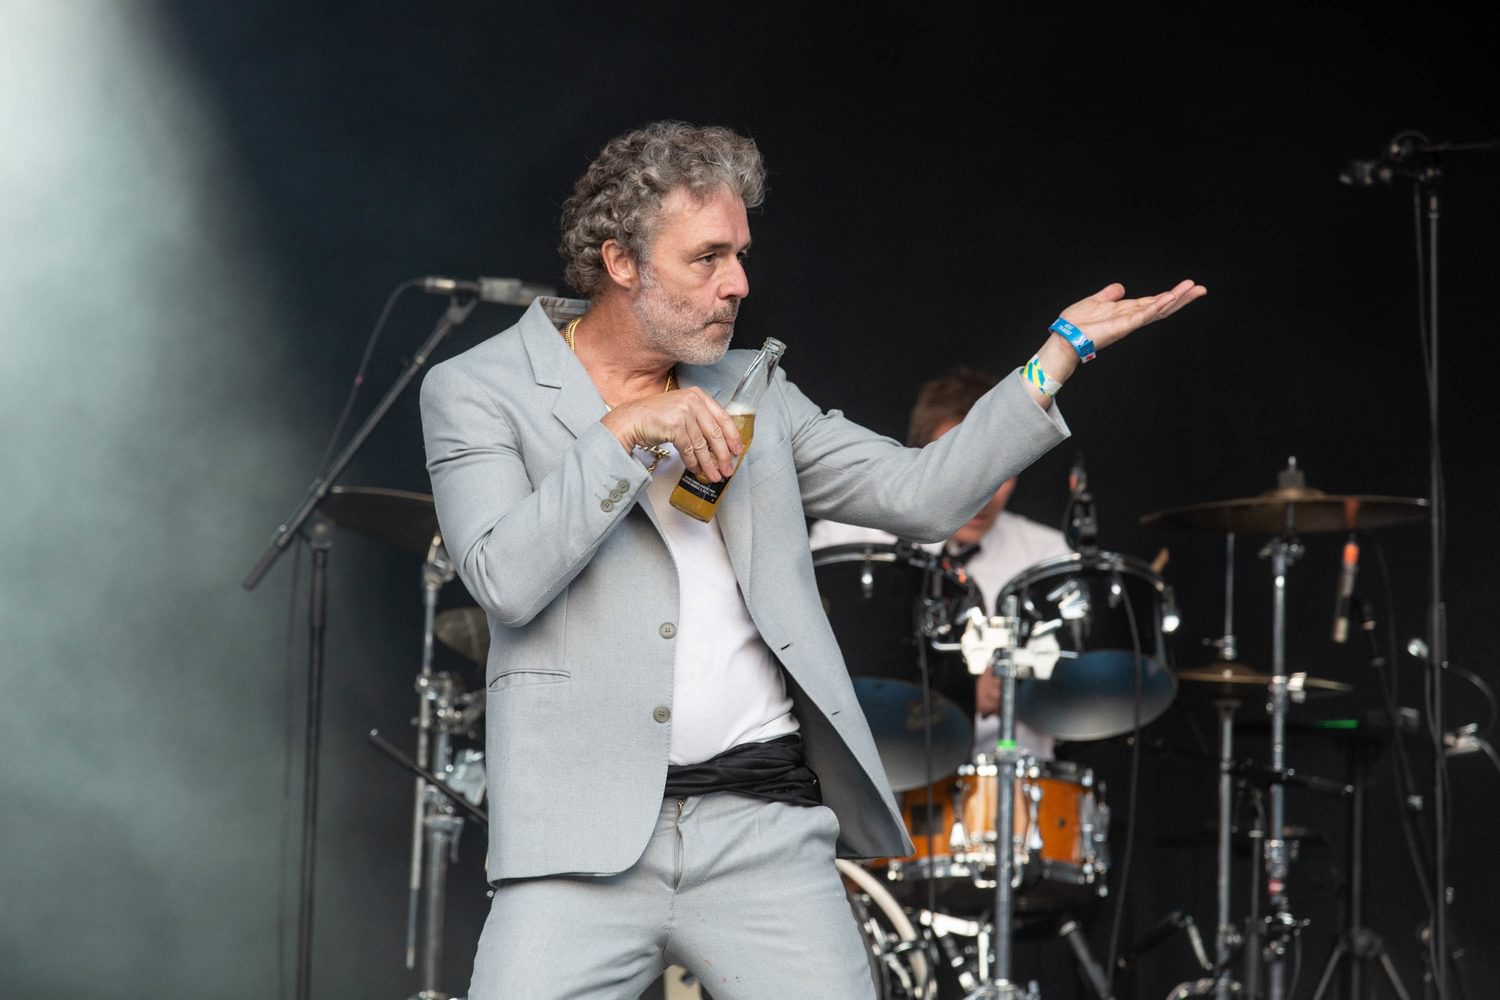 Baxter Dury, Sleaford Mods and Fat White Family shake up the scenery at South Facing’s first weekend